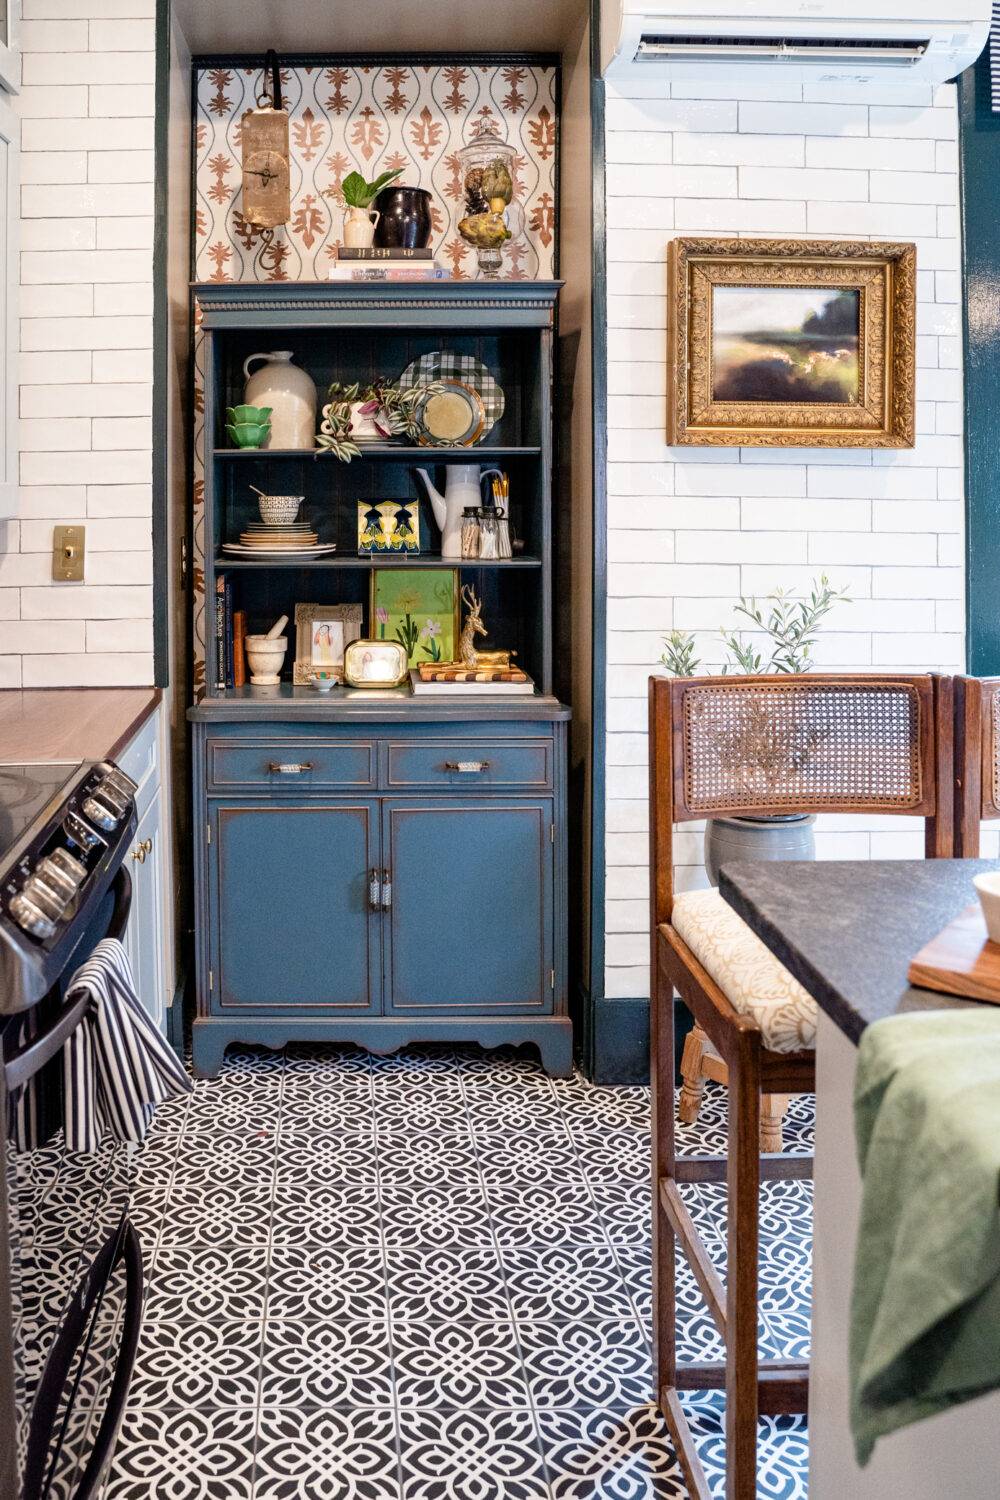 This cozy kitchen features a black-and-white patterned tile floor and white subway tile walls. 